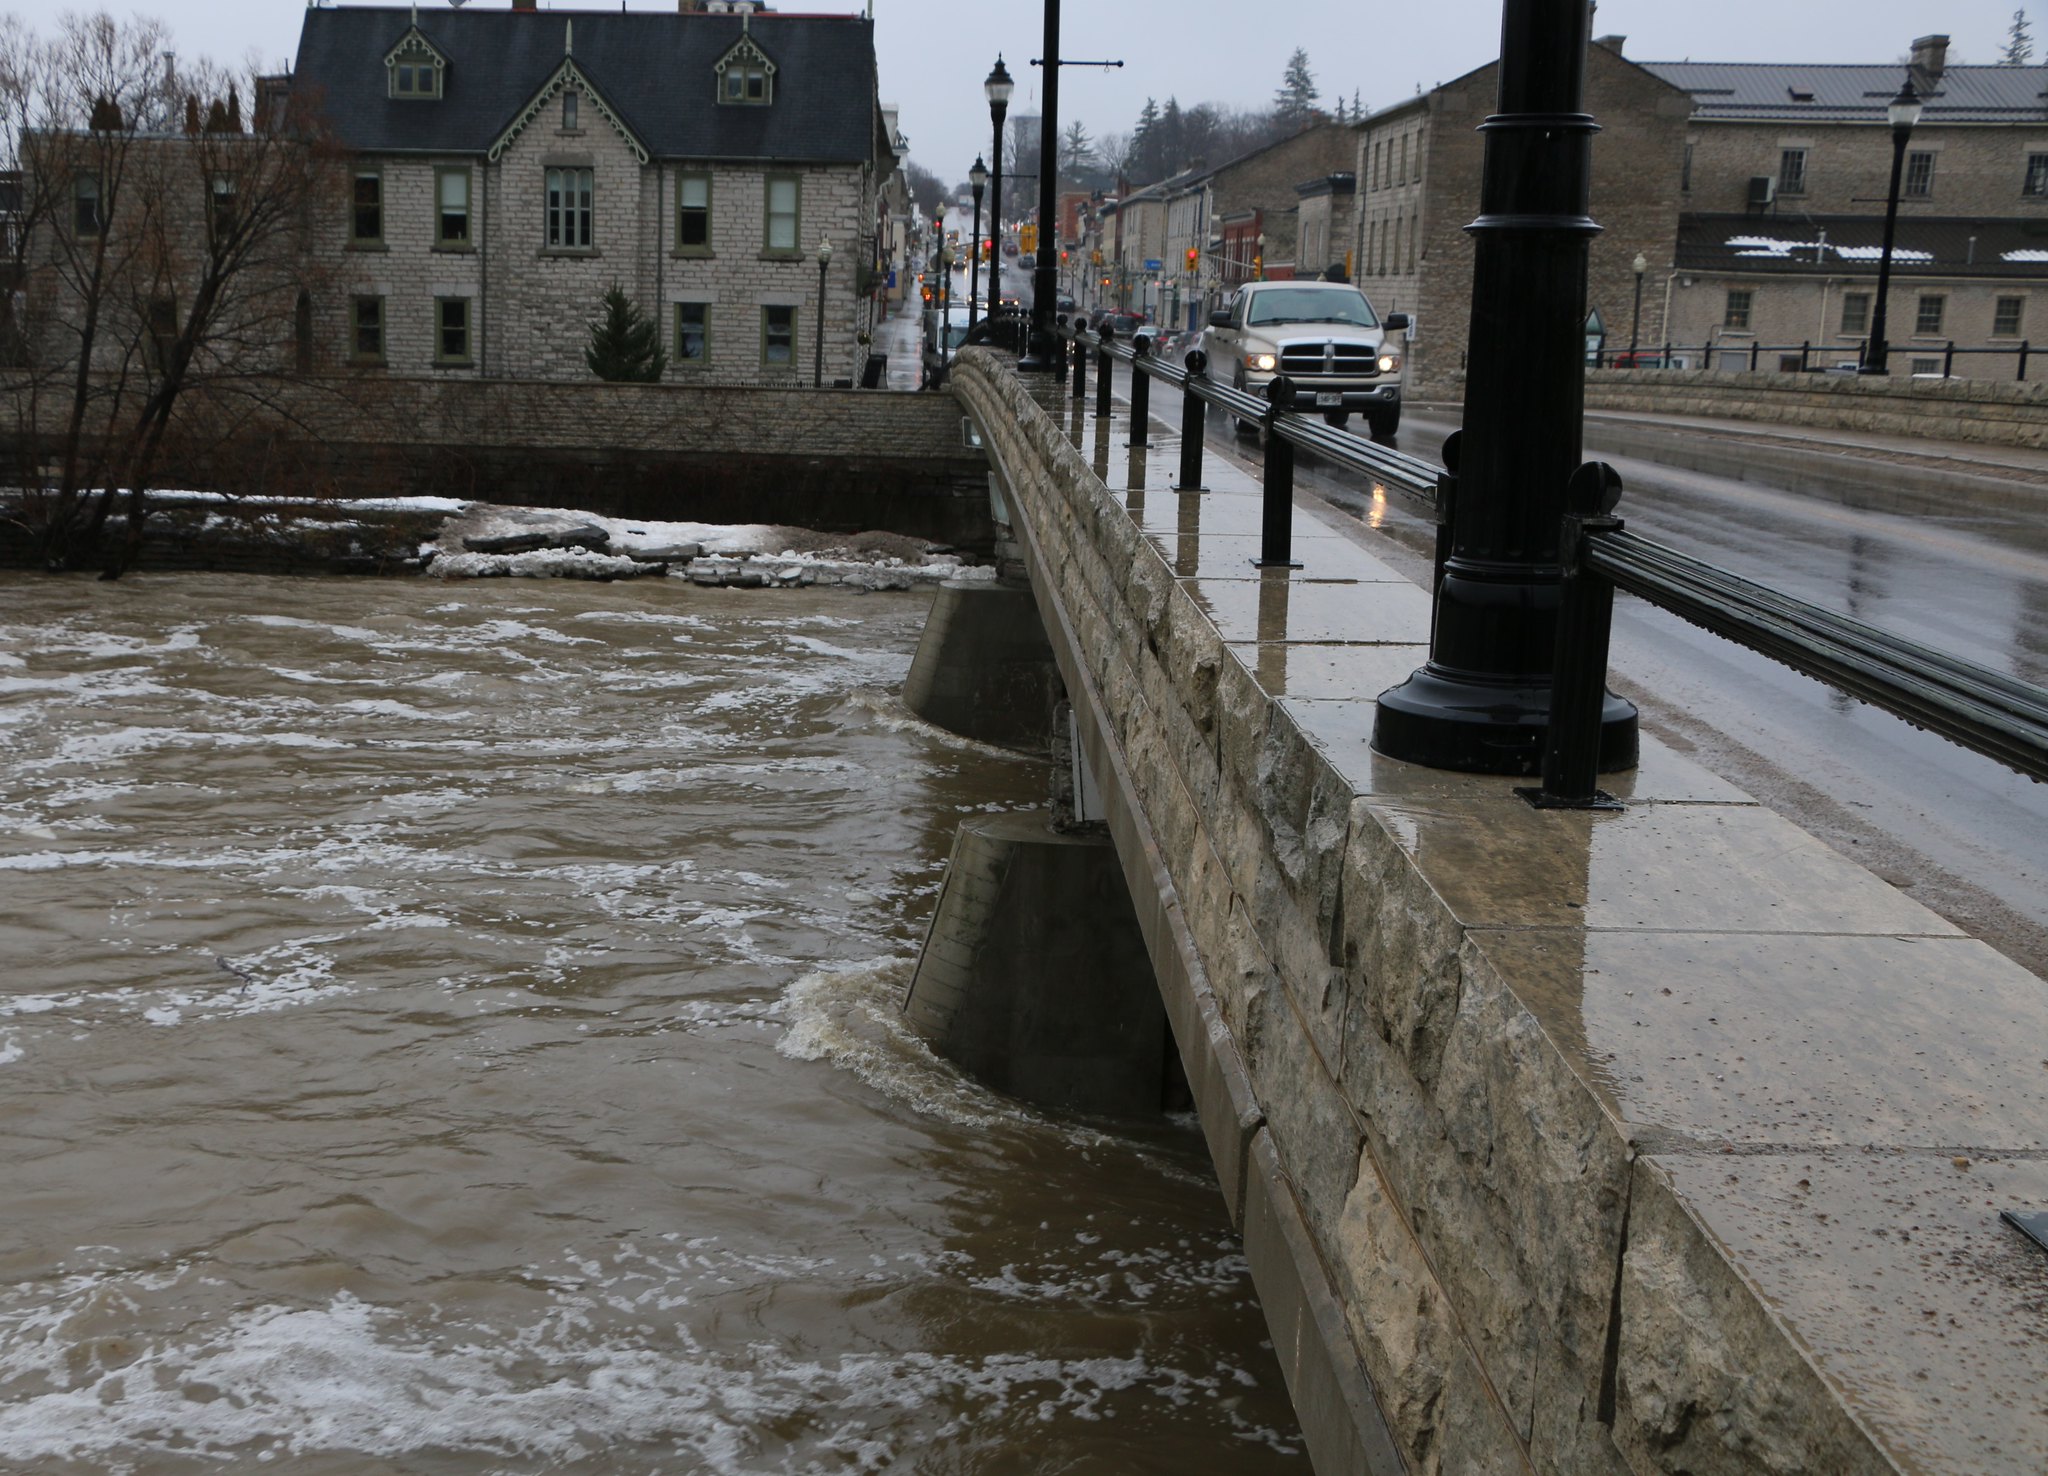 The Thames River flooding under a bridge in St. Marys Ontario.